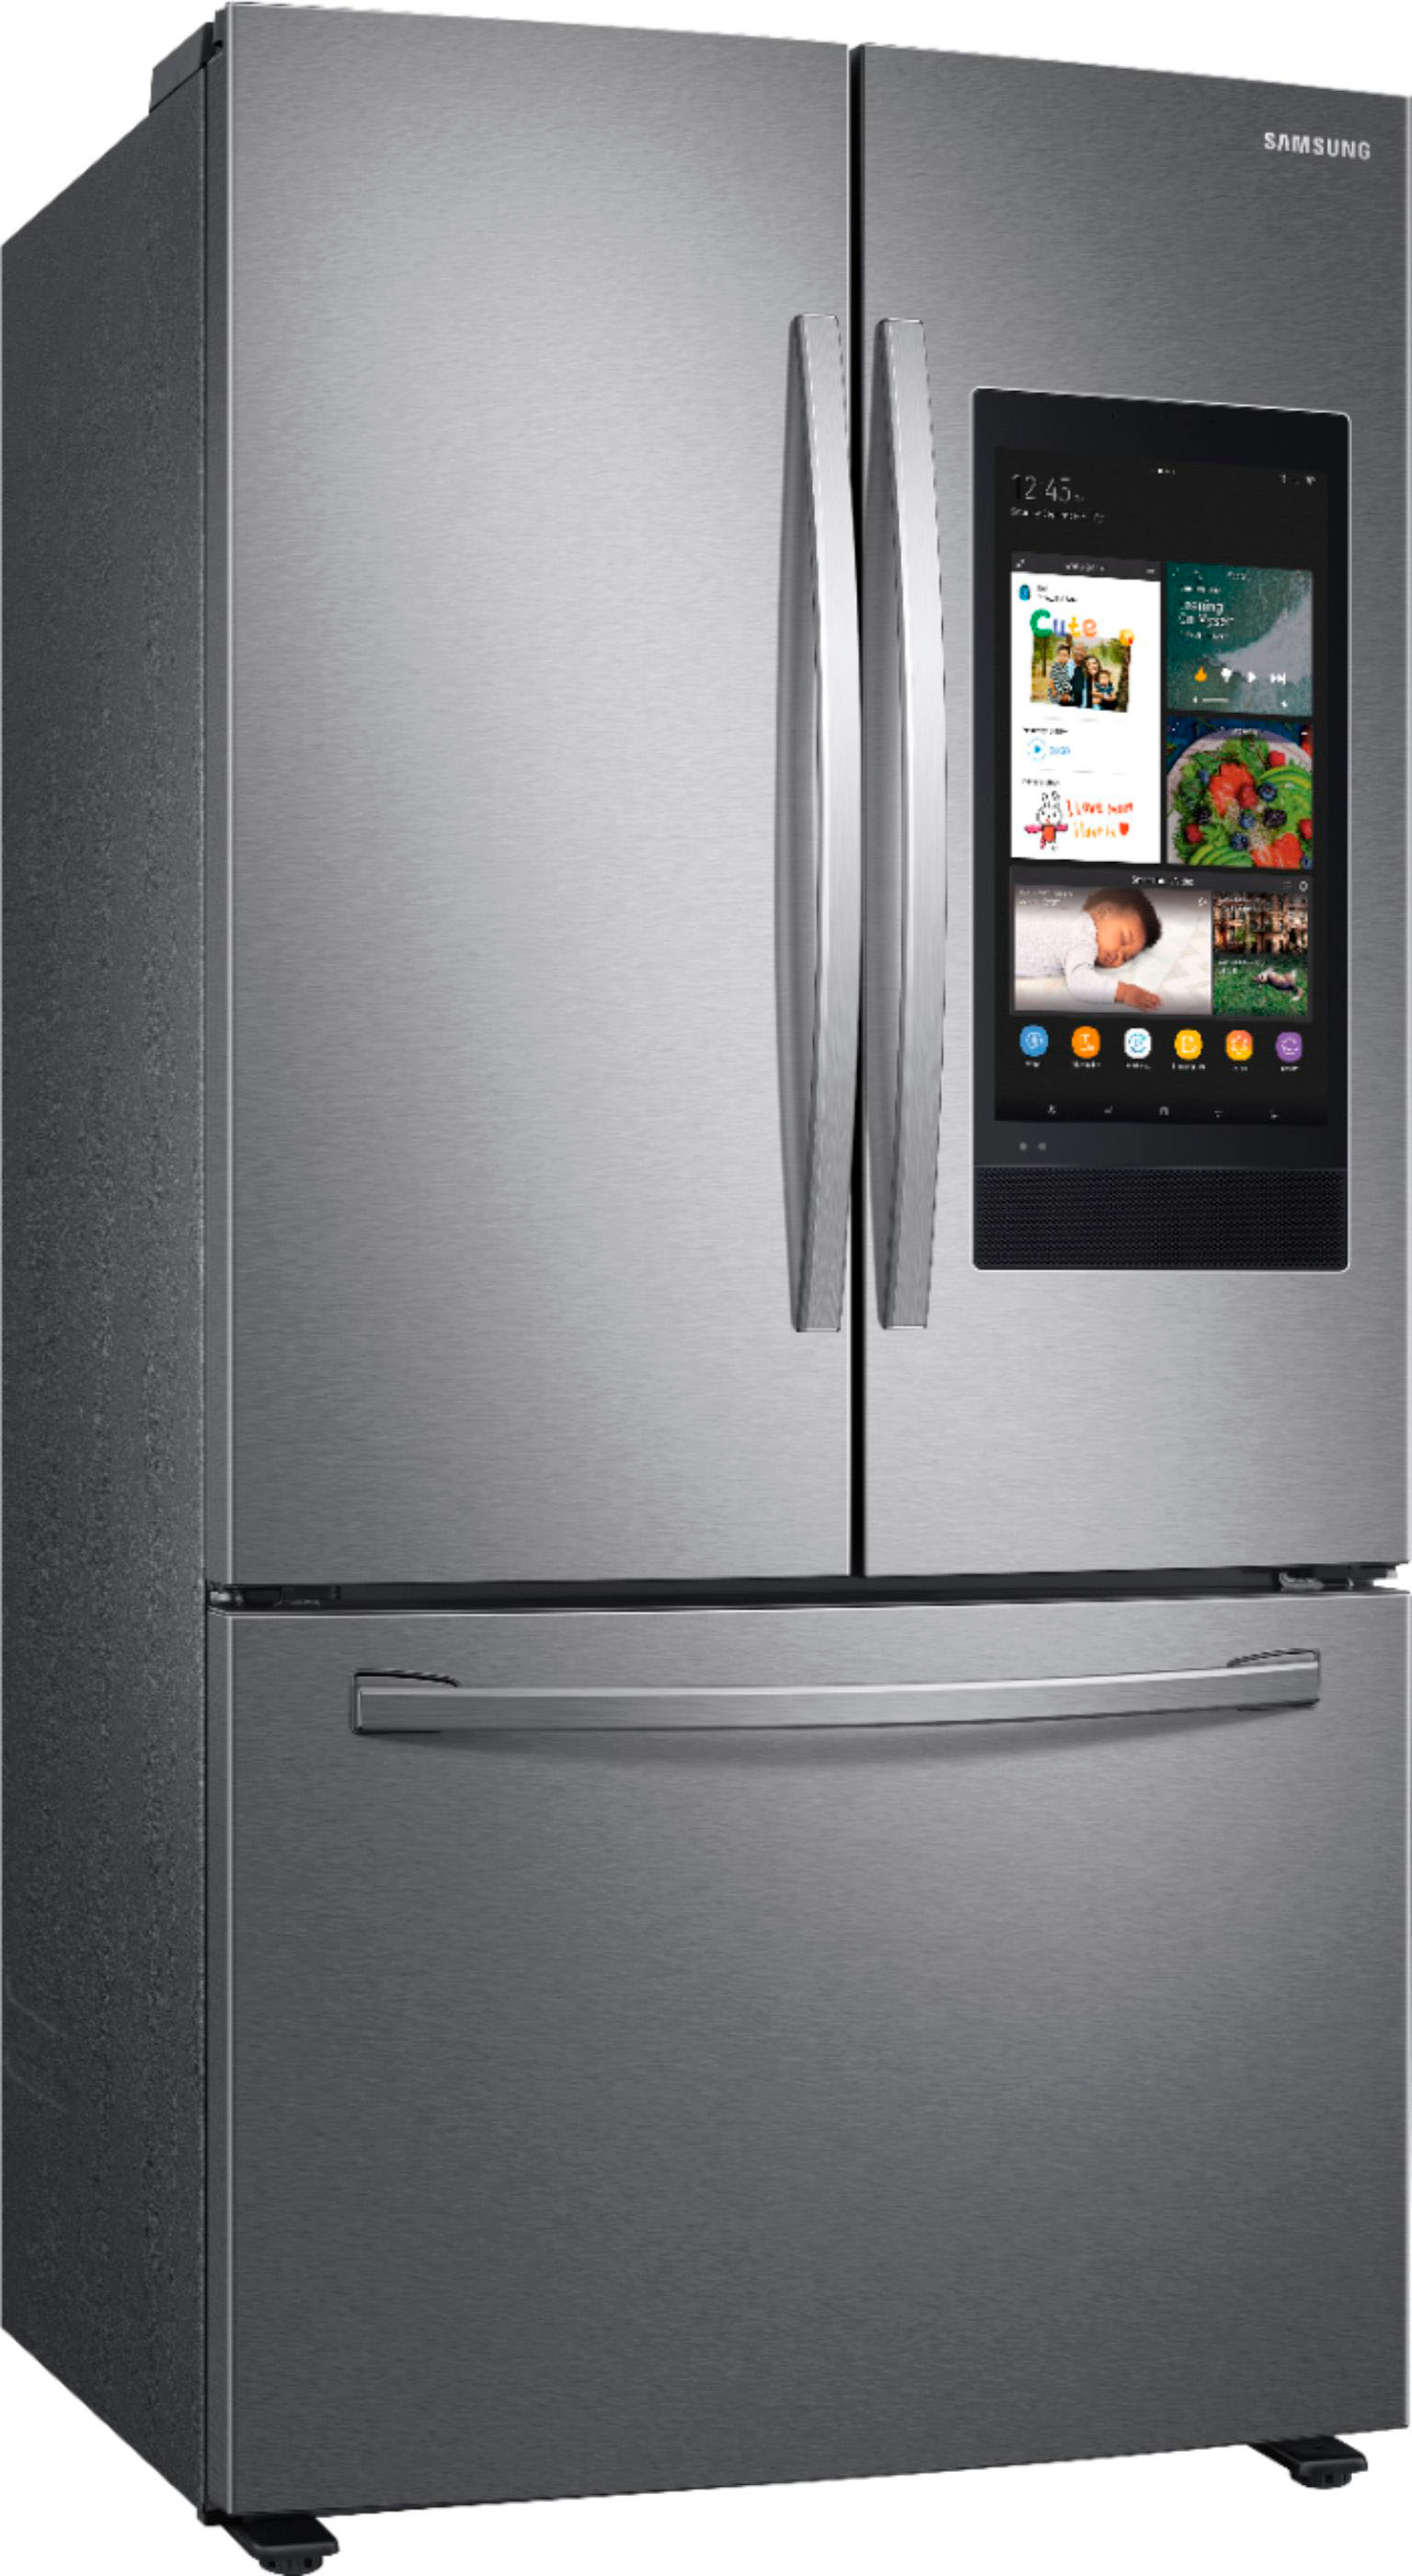 Angle View: Samsung - Geek Squad Certified Refurbished 28 cu. ft. 3-Door French Door Refrigerator with Family Hub™ - Stainless steel